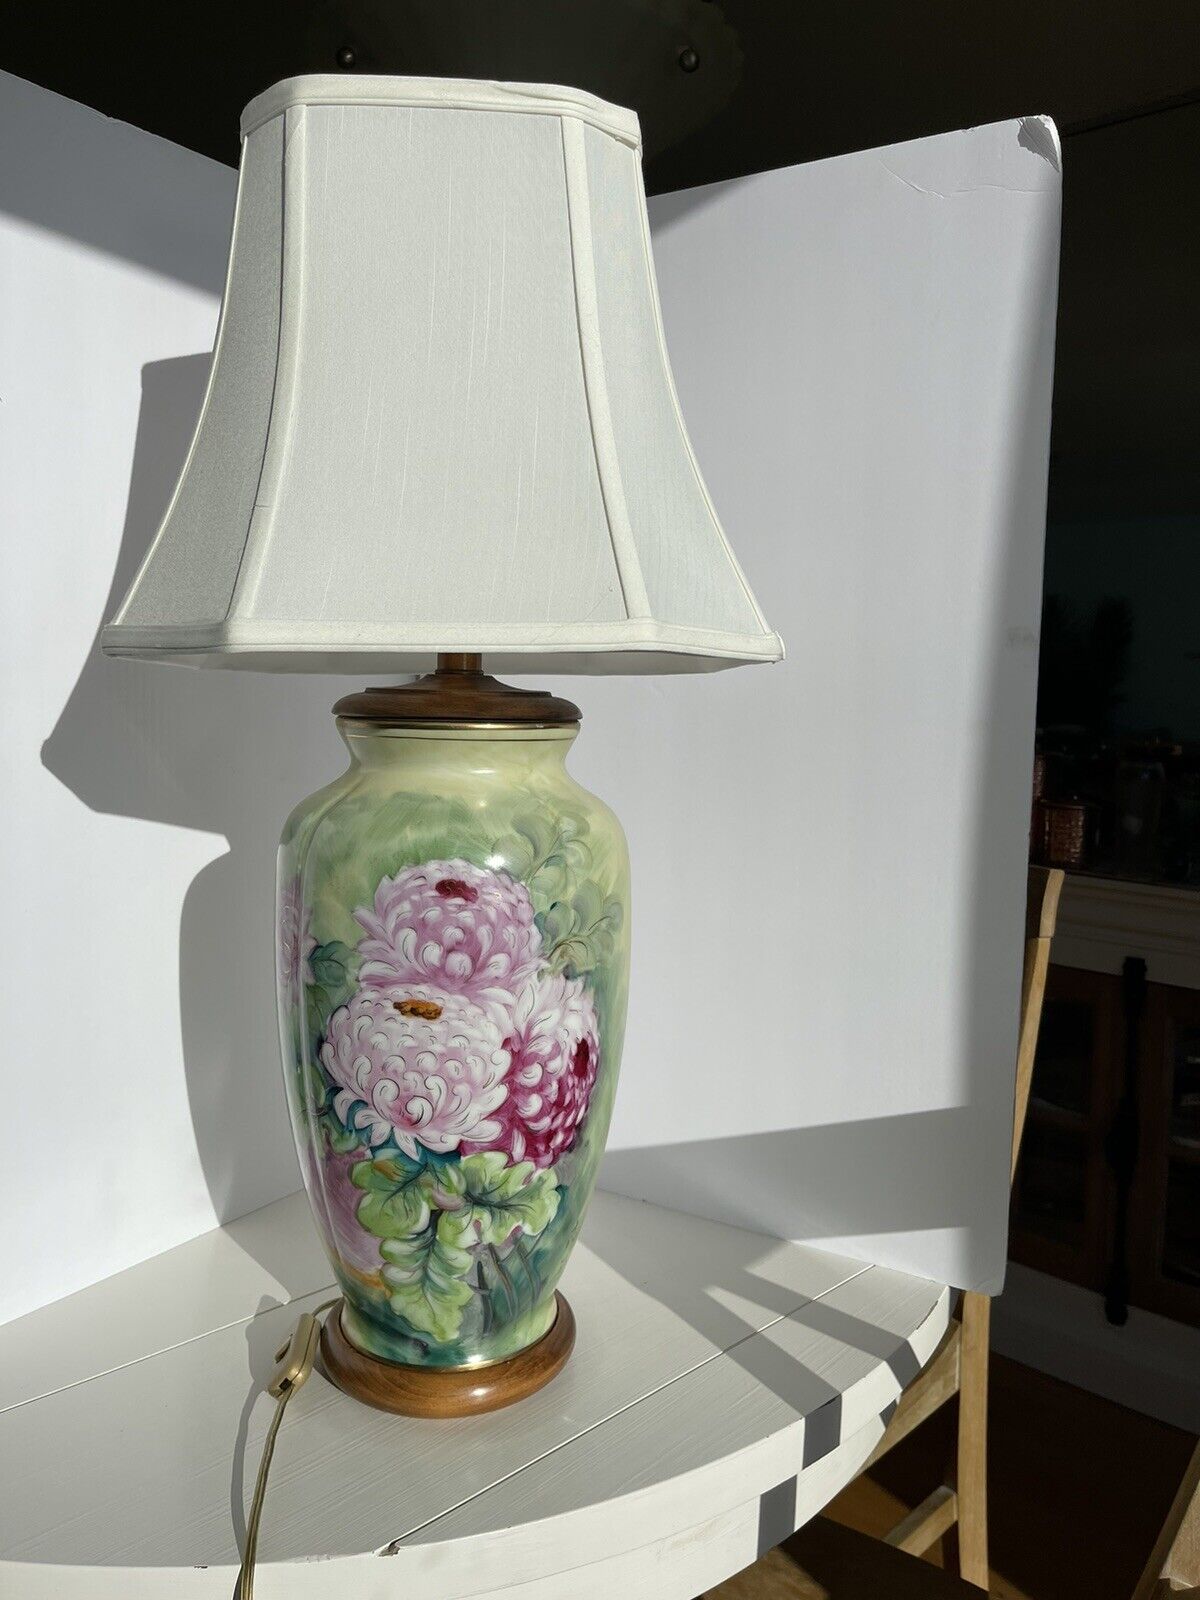 Exquisite hand-painted lamp with artist signature